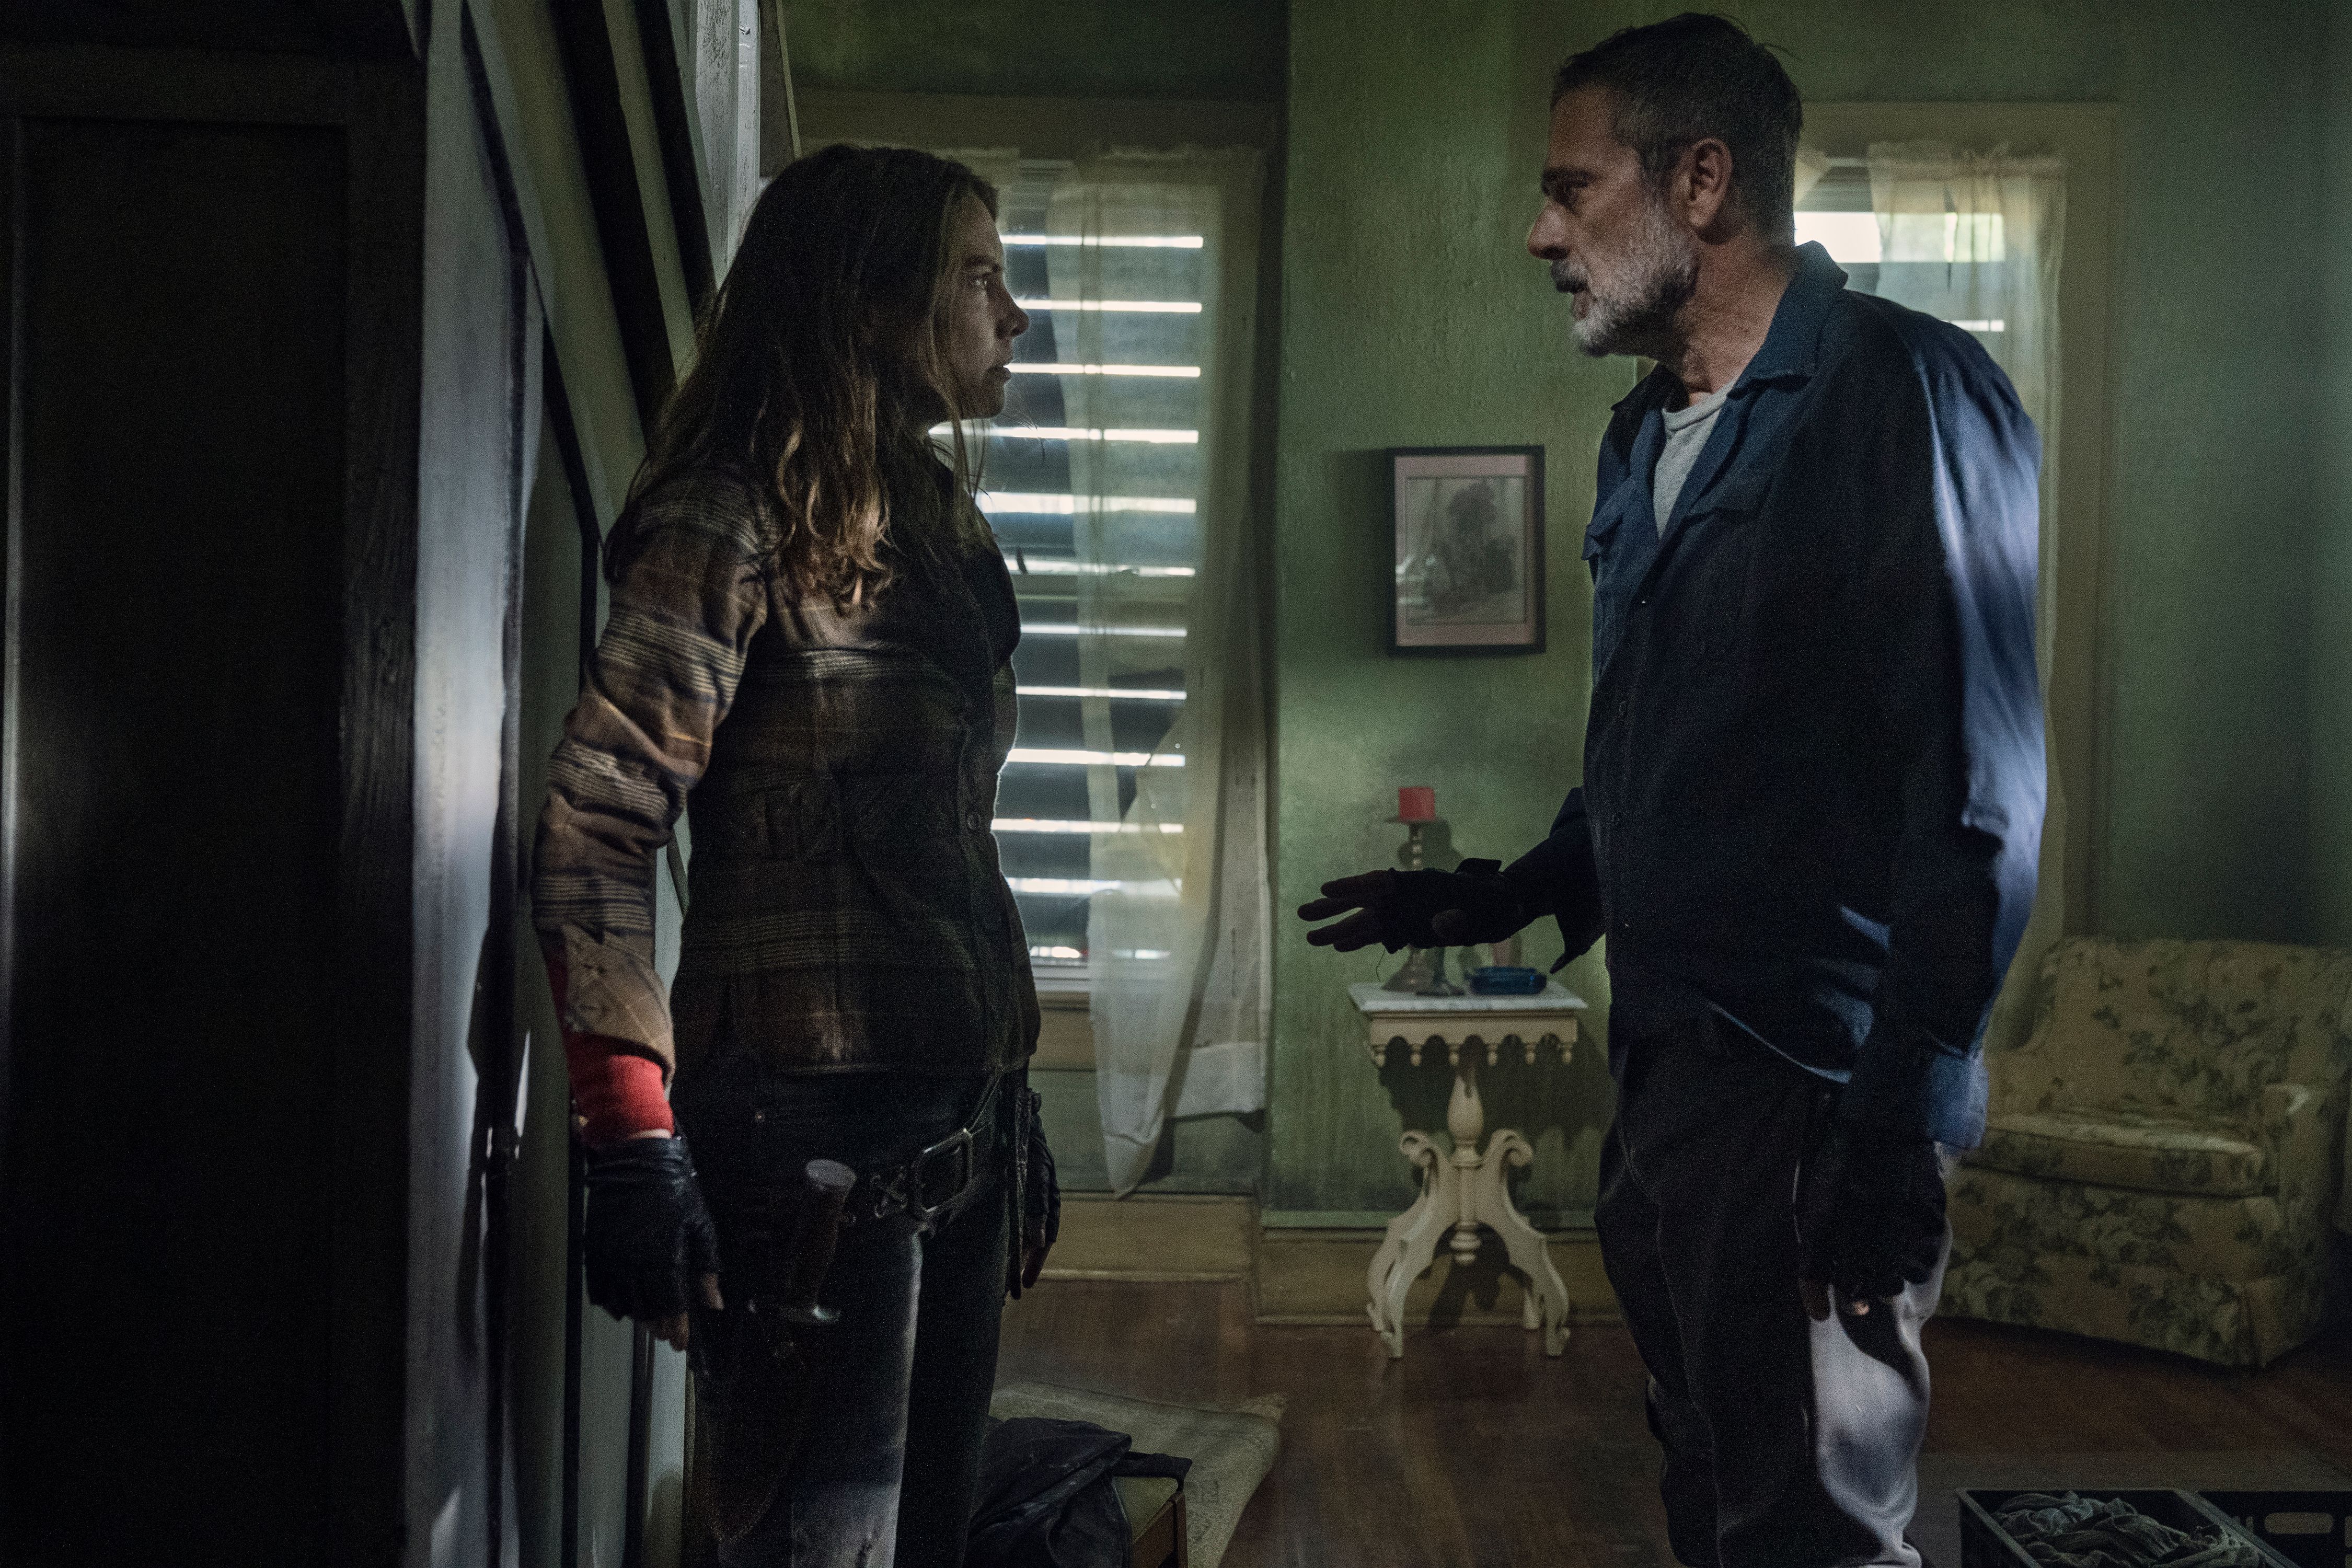 Negan And Maggie Discuss Matters On The Walking Dead